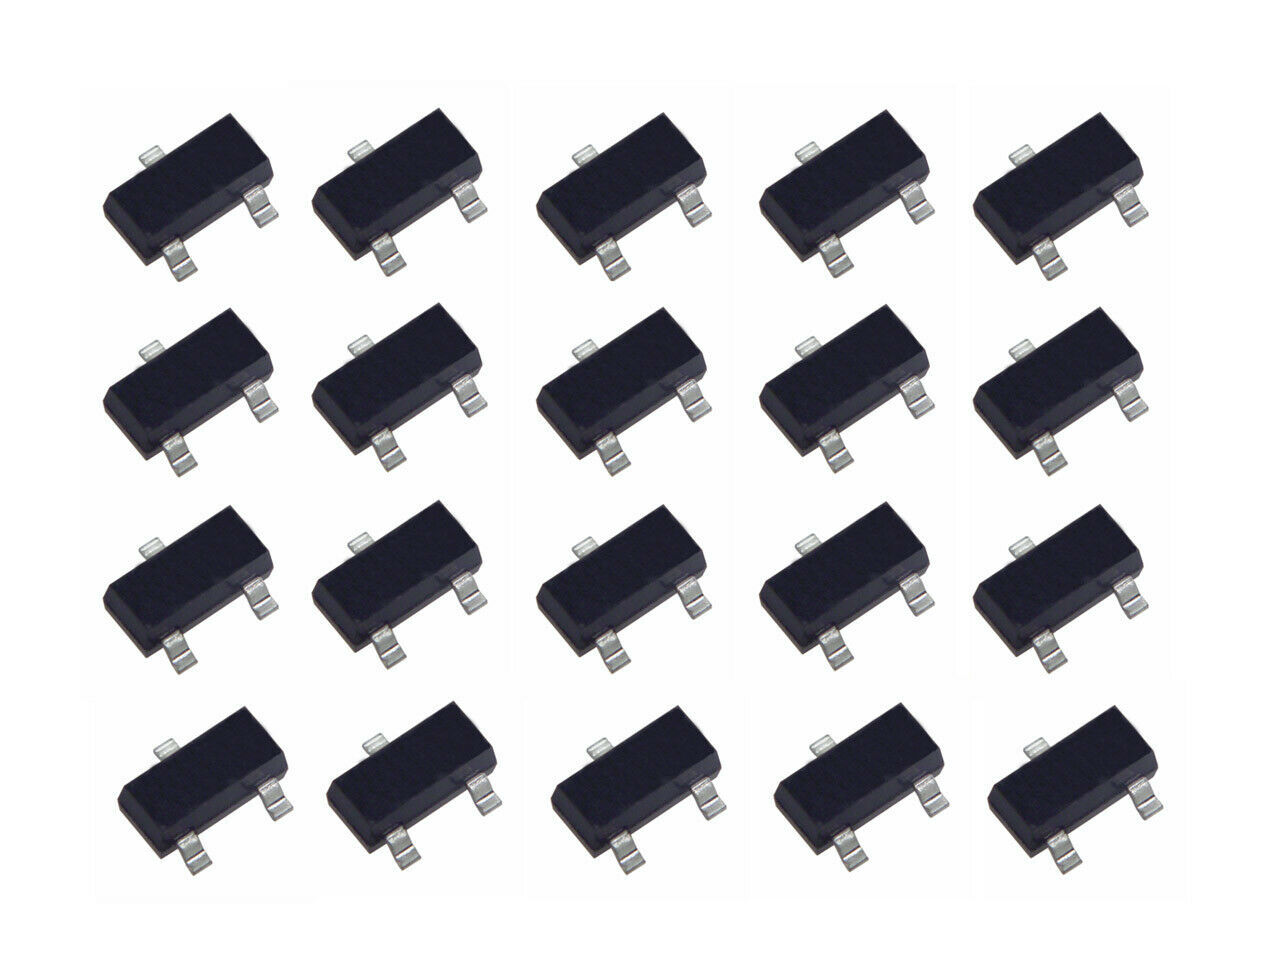 Primary image for 20Pc Pack Lot SOT-23 Triode Transistor SMD TL431 TL431A 431 A 0.5% Voltage Shunt